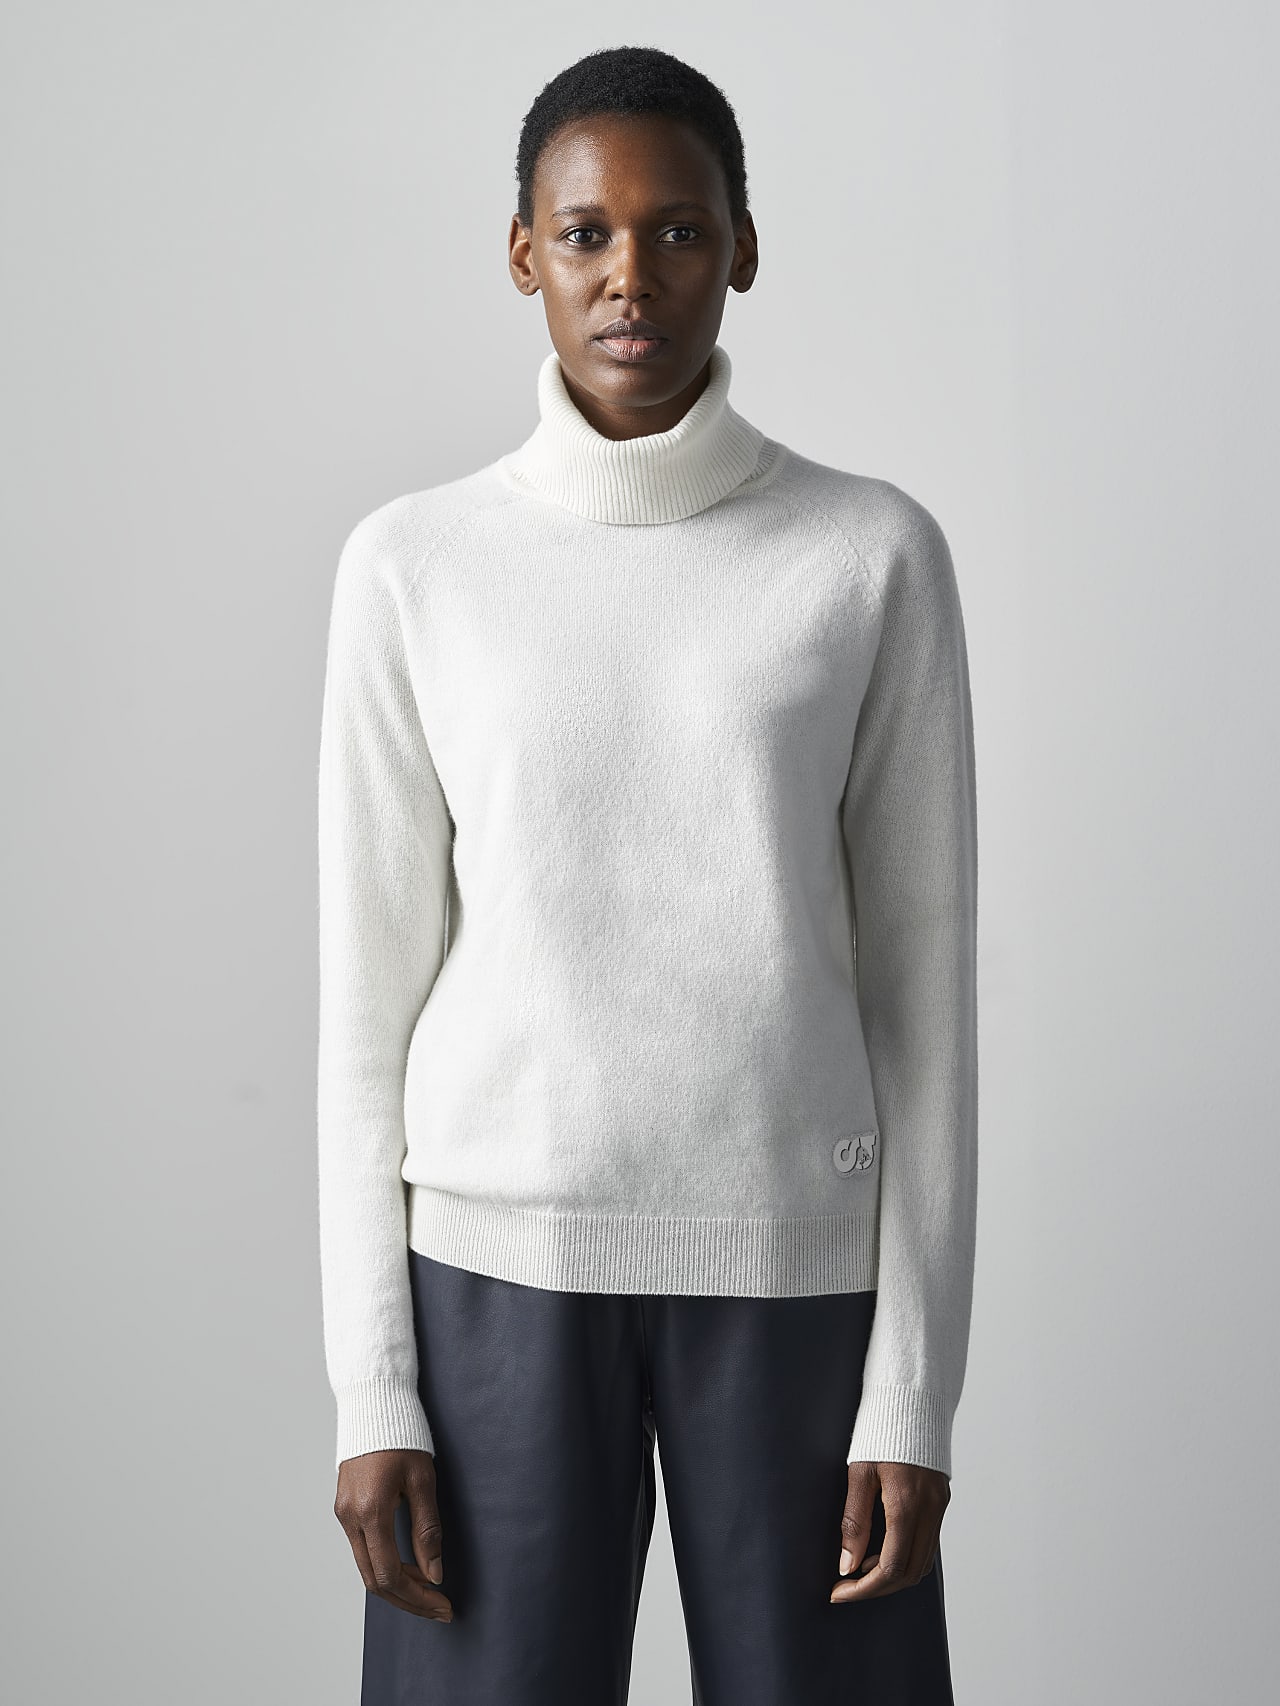 AlphaTauri | FLAMY V1.Y5.02 | Seamless 3D Knit Merino-Cashmere Turtle Neck in offwhite for Women